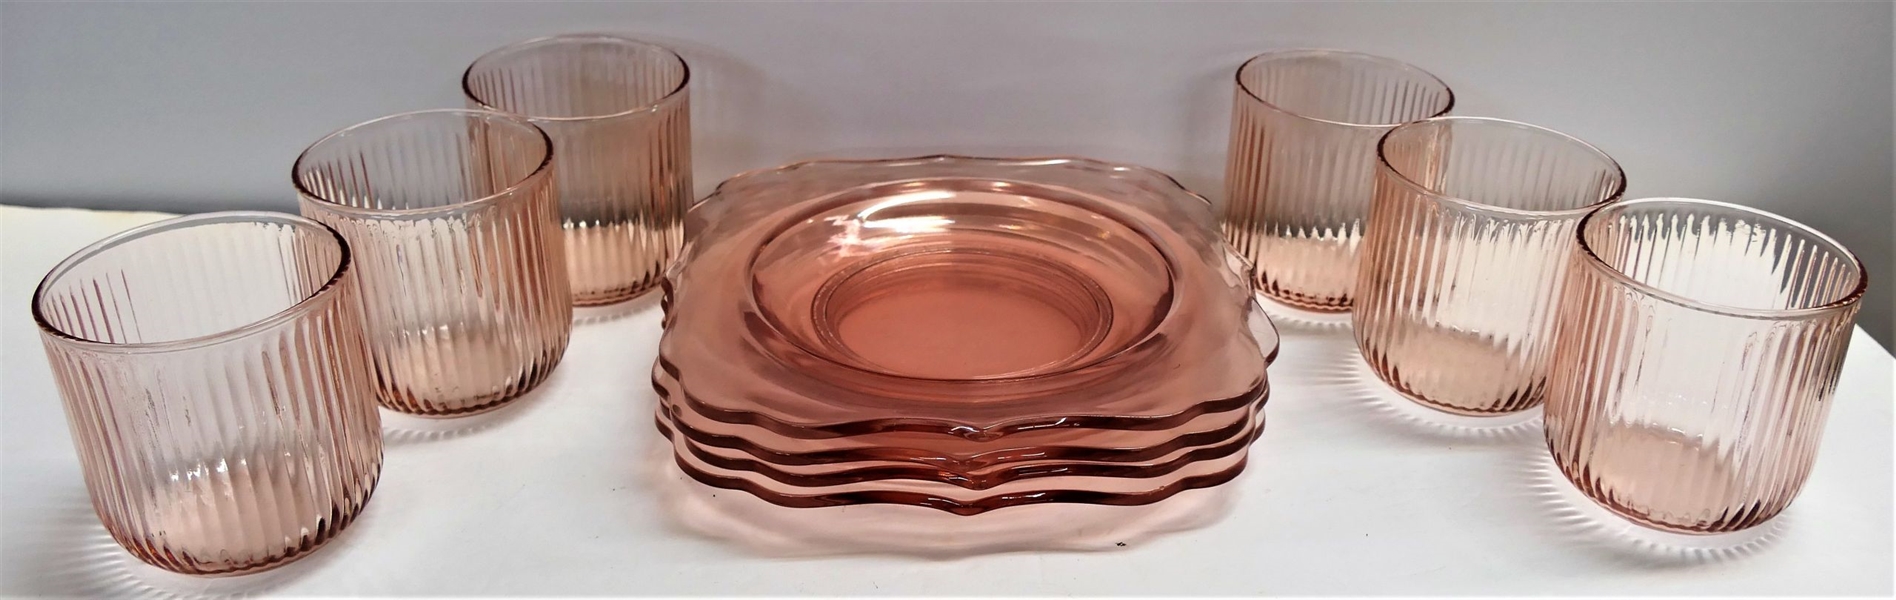 4 Pink Depression Square Plates 7 1/2" Across and 6 Pink Ribbed Anchor Hocking Tumblers 3 1/8" tall 